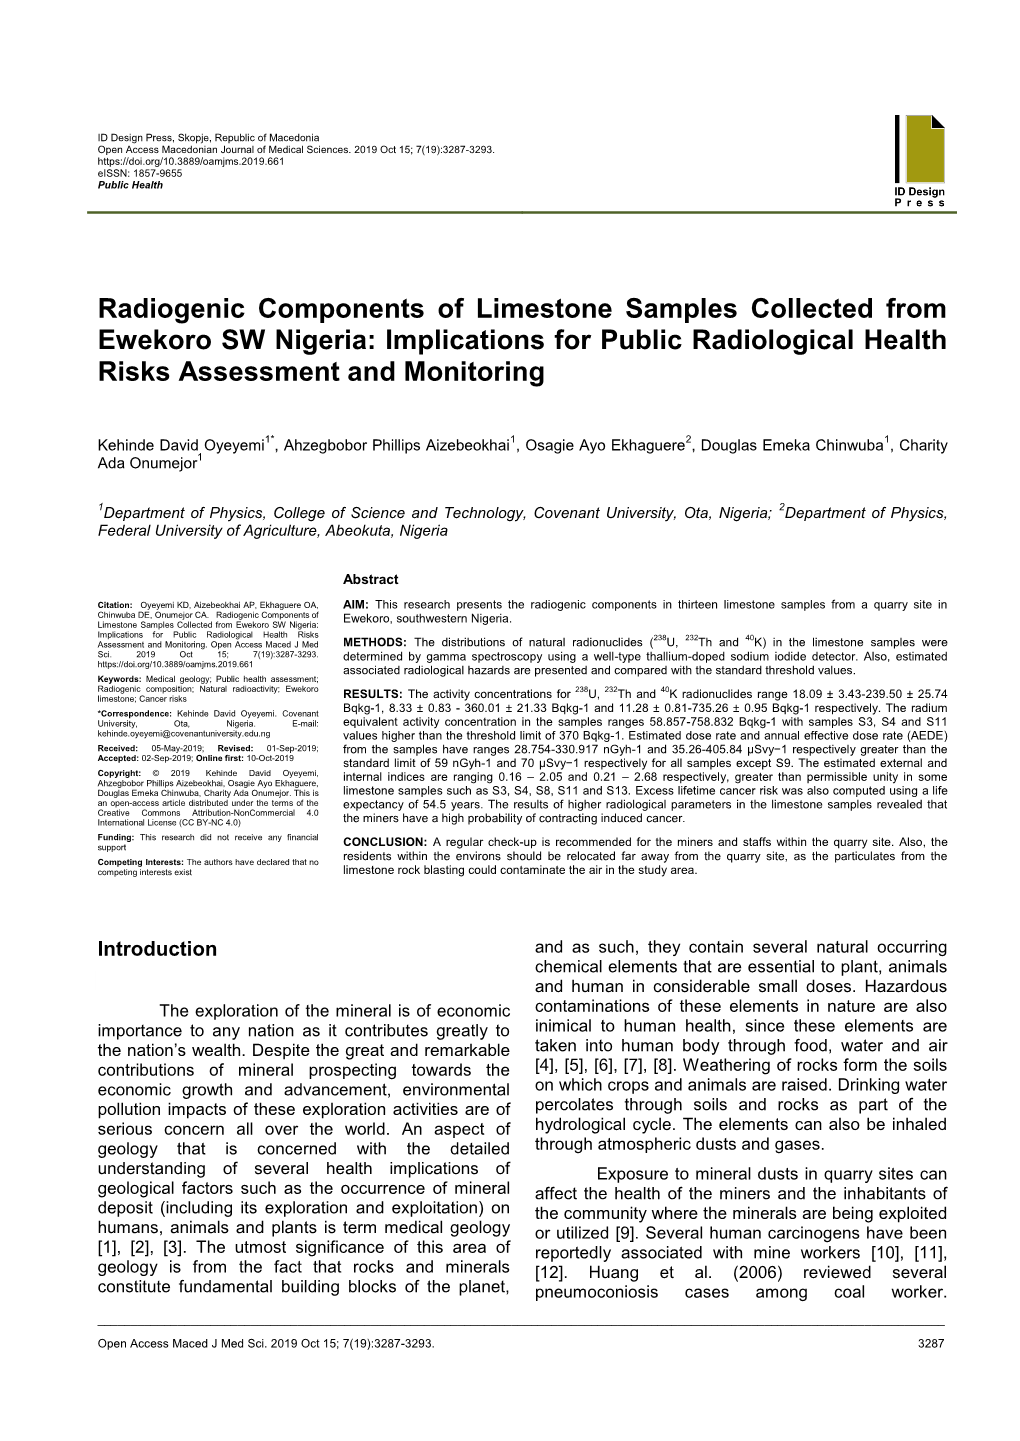 Radiogenic Components of Limestone Samples Collected from Ewekoro SW Nigeria: Implications for Public Radiological Health Risks Assessment and Monitoring